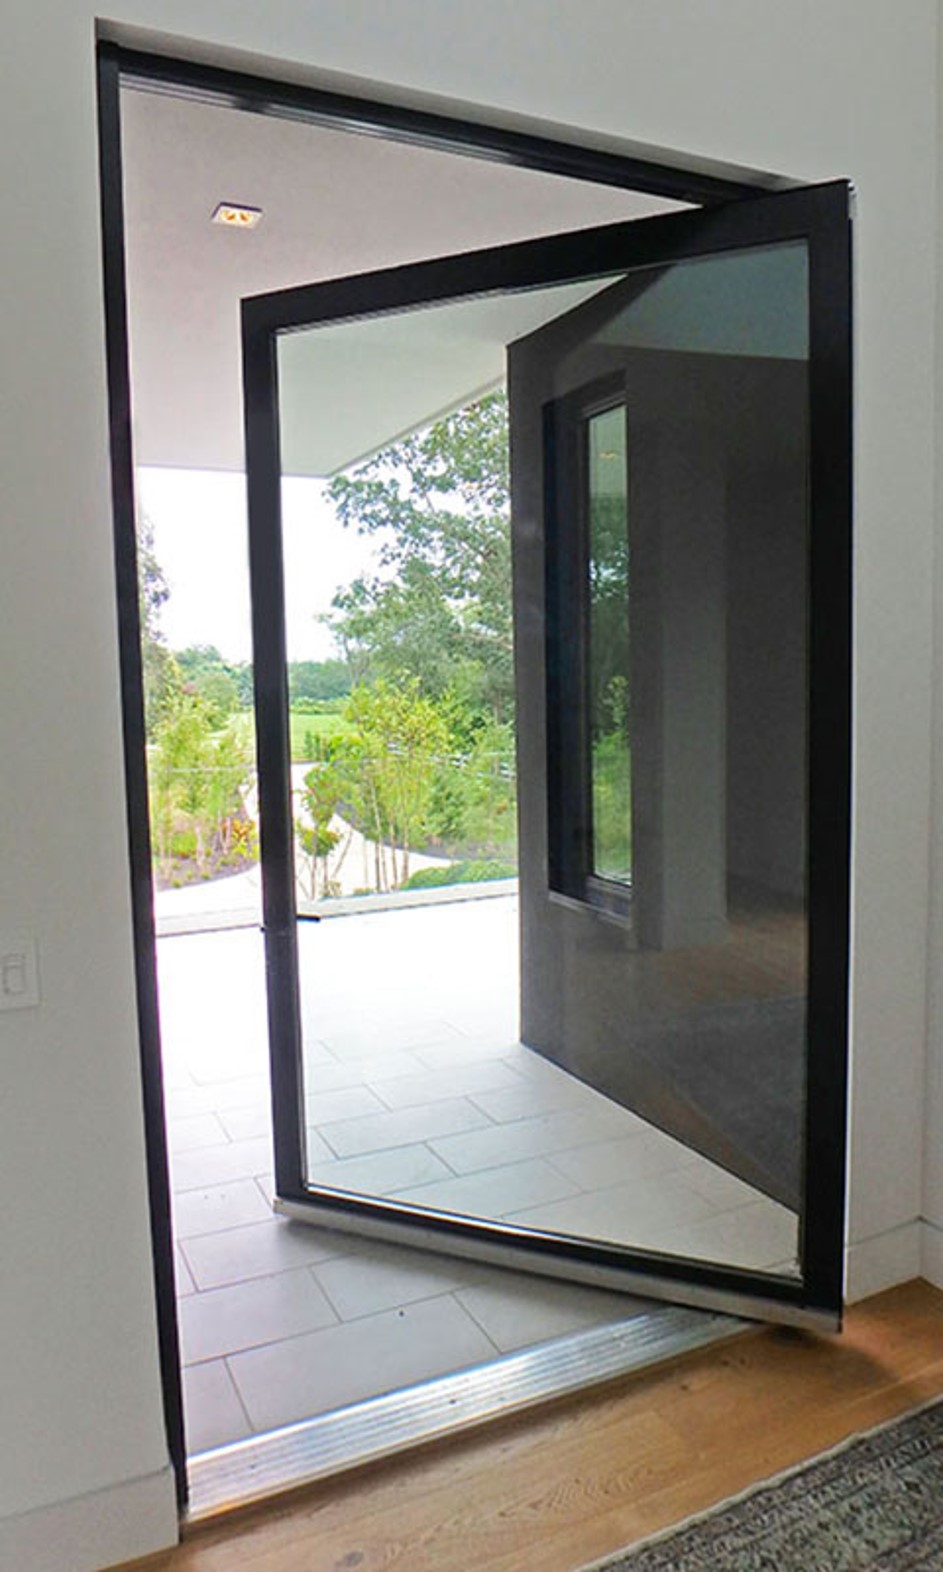 Door mesh or screen with best net design that restricts mosquito entry and perfect for sliding and folding doors.